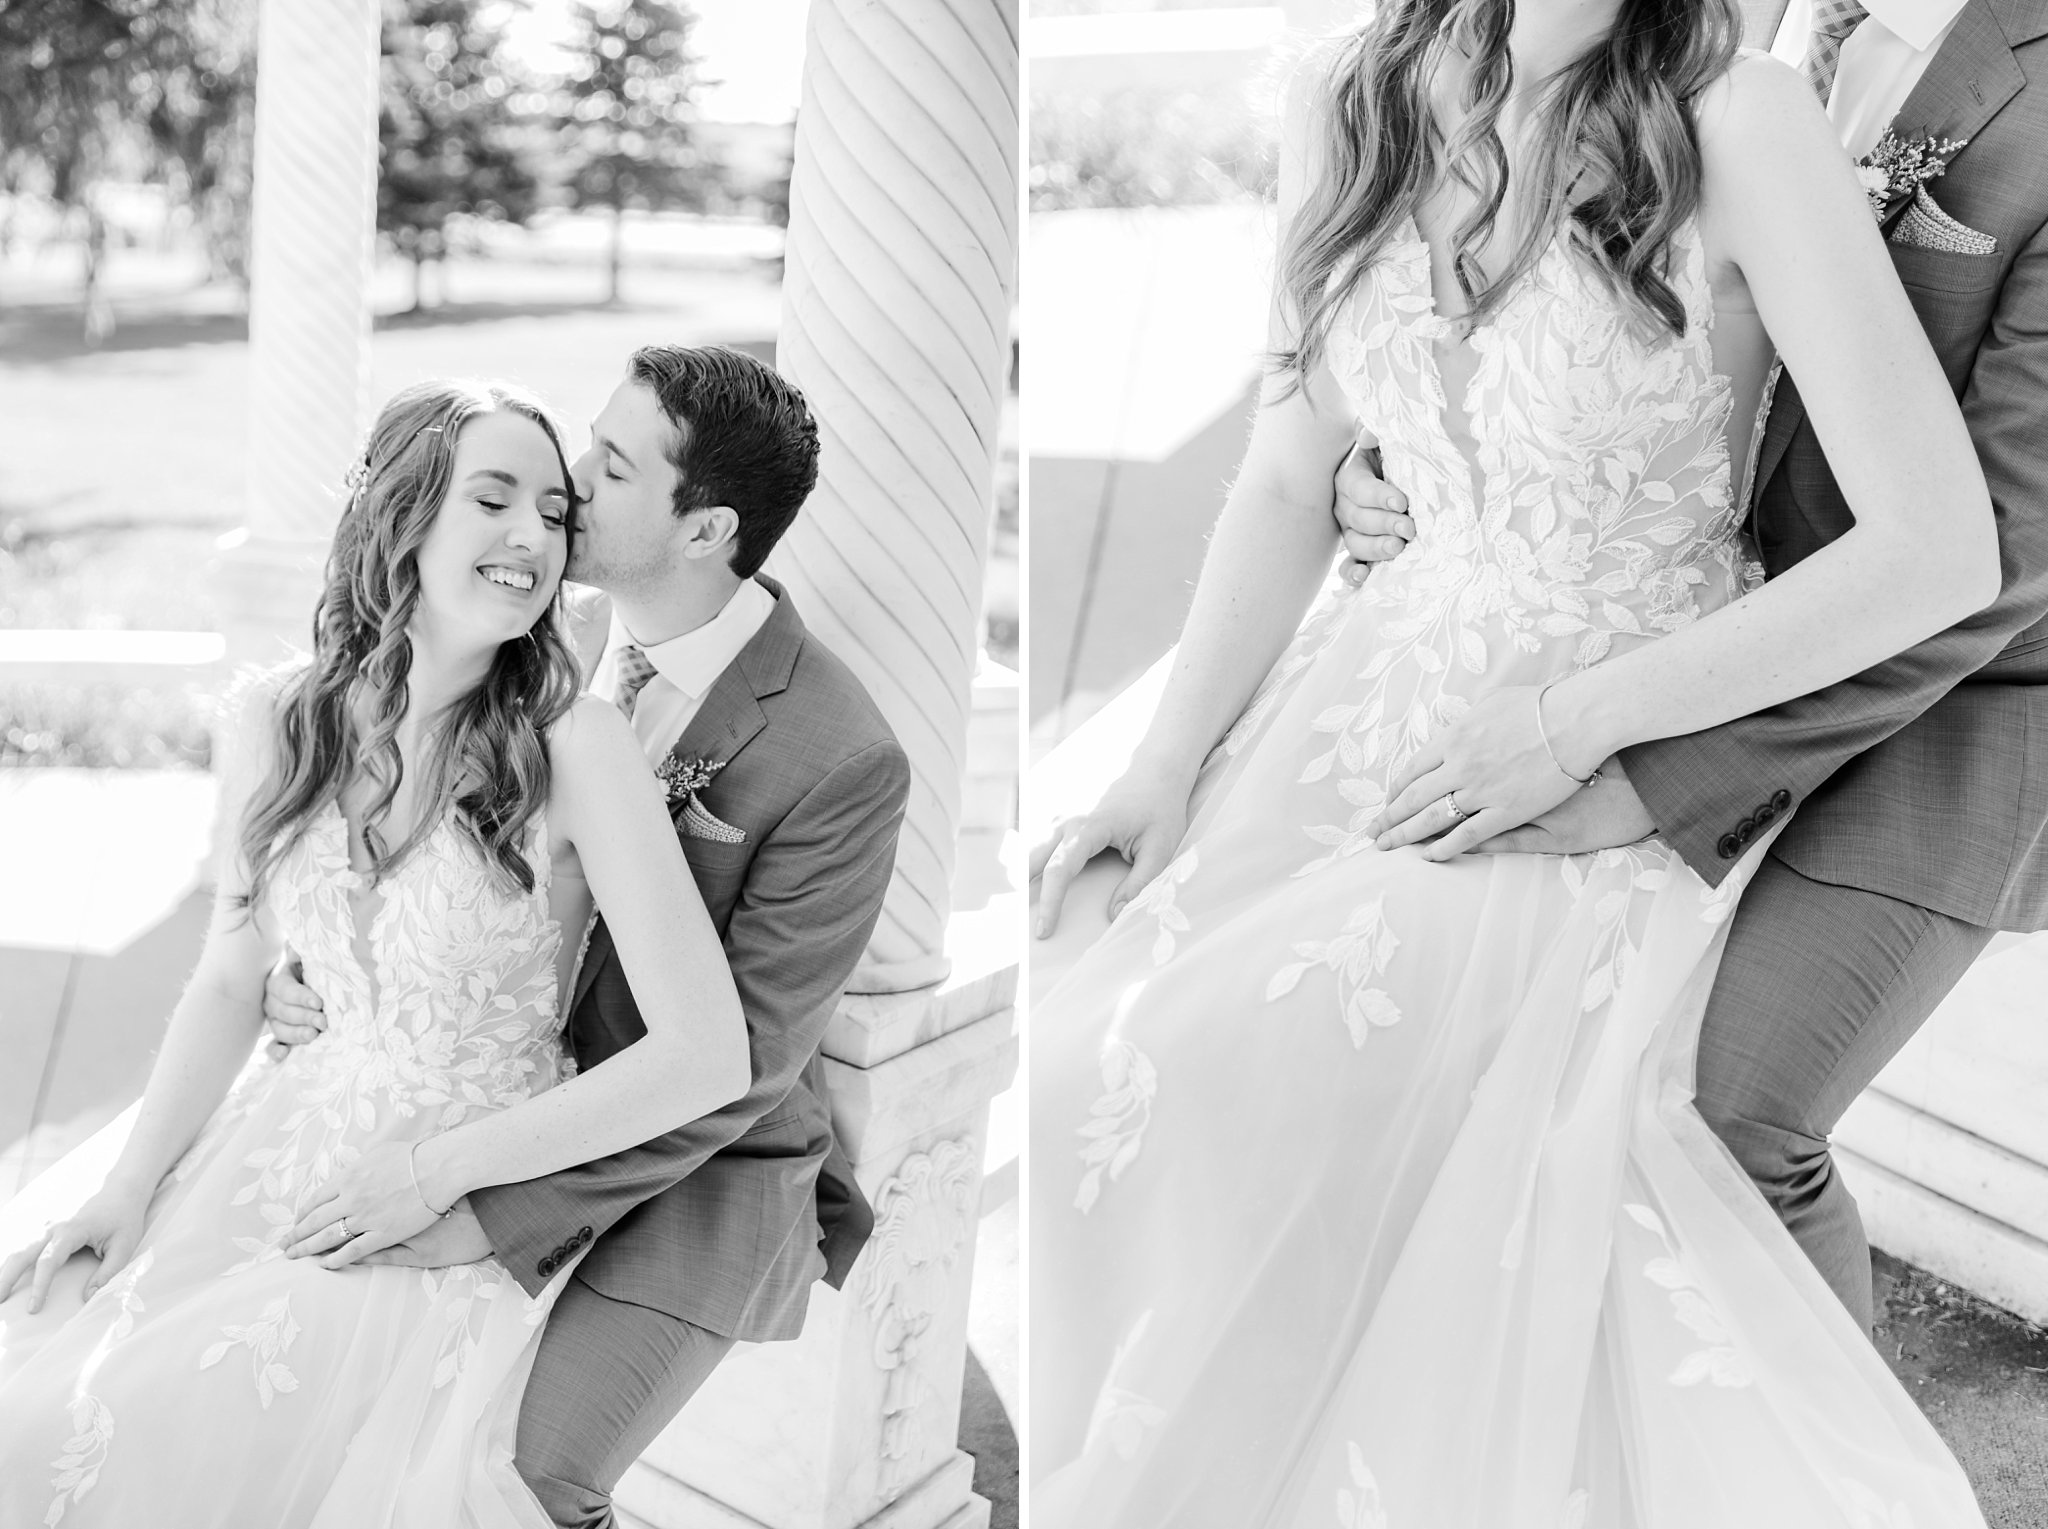 a groom kisses a bride's forehead while they sit together on a bench